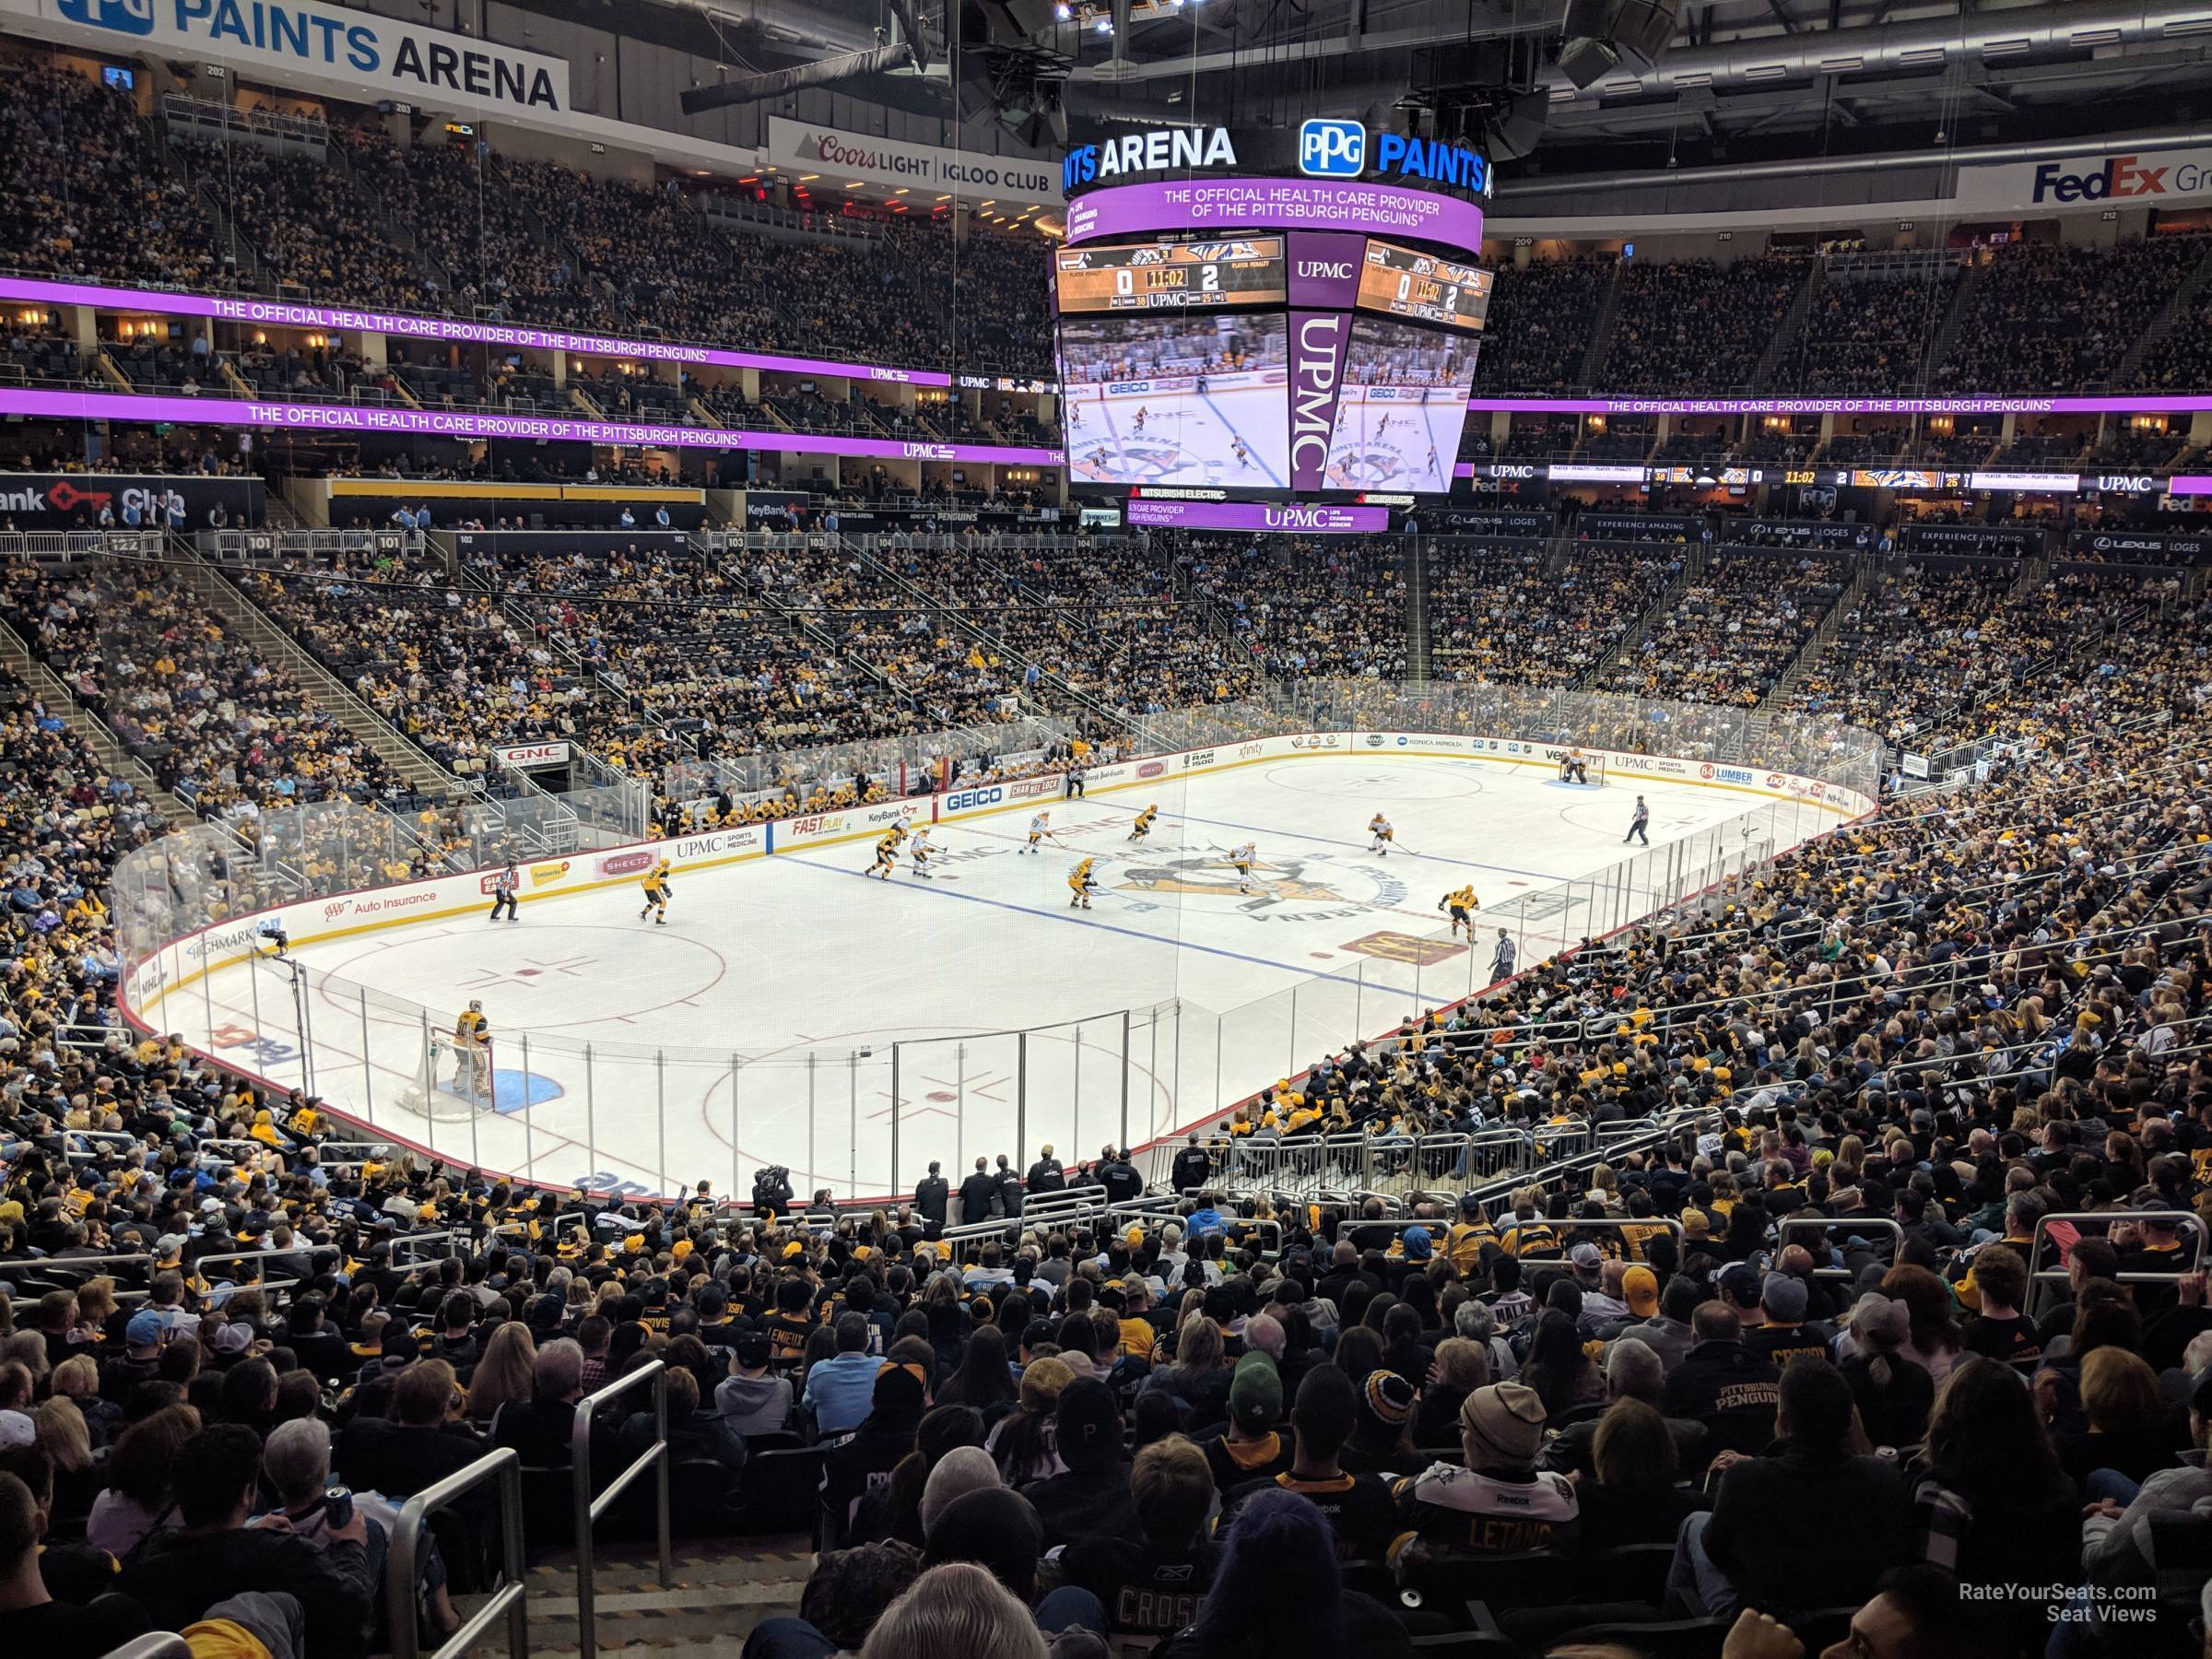 Section 116 at PPG Paints Arena Pittsburgh Penguins